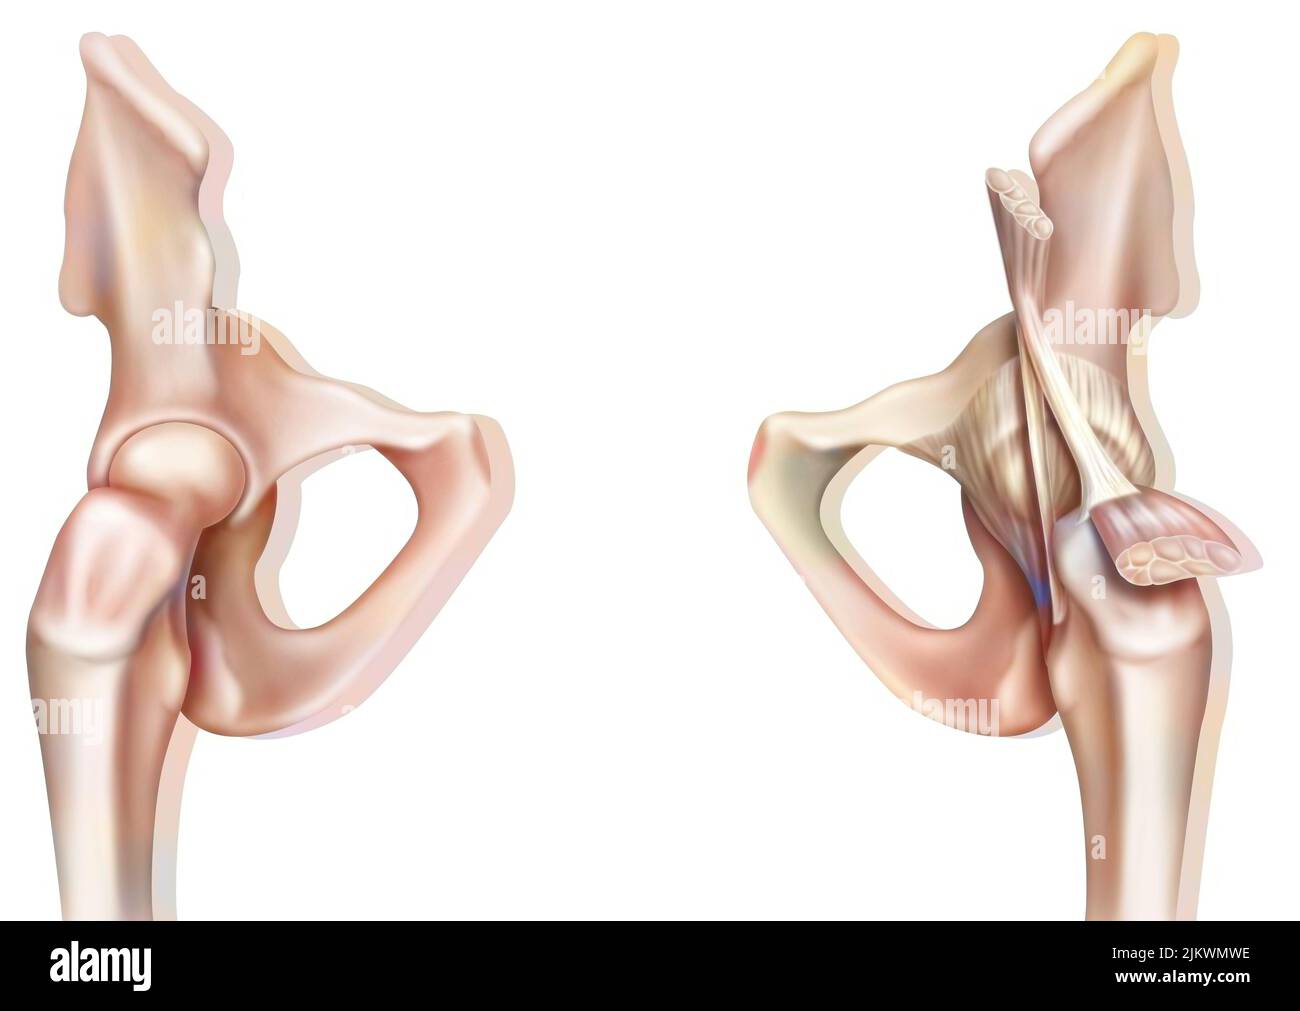 Bone joint of the hip without and with the coxofemoral joint capsule. Stock Photo